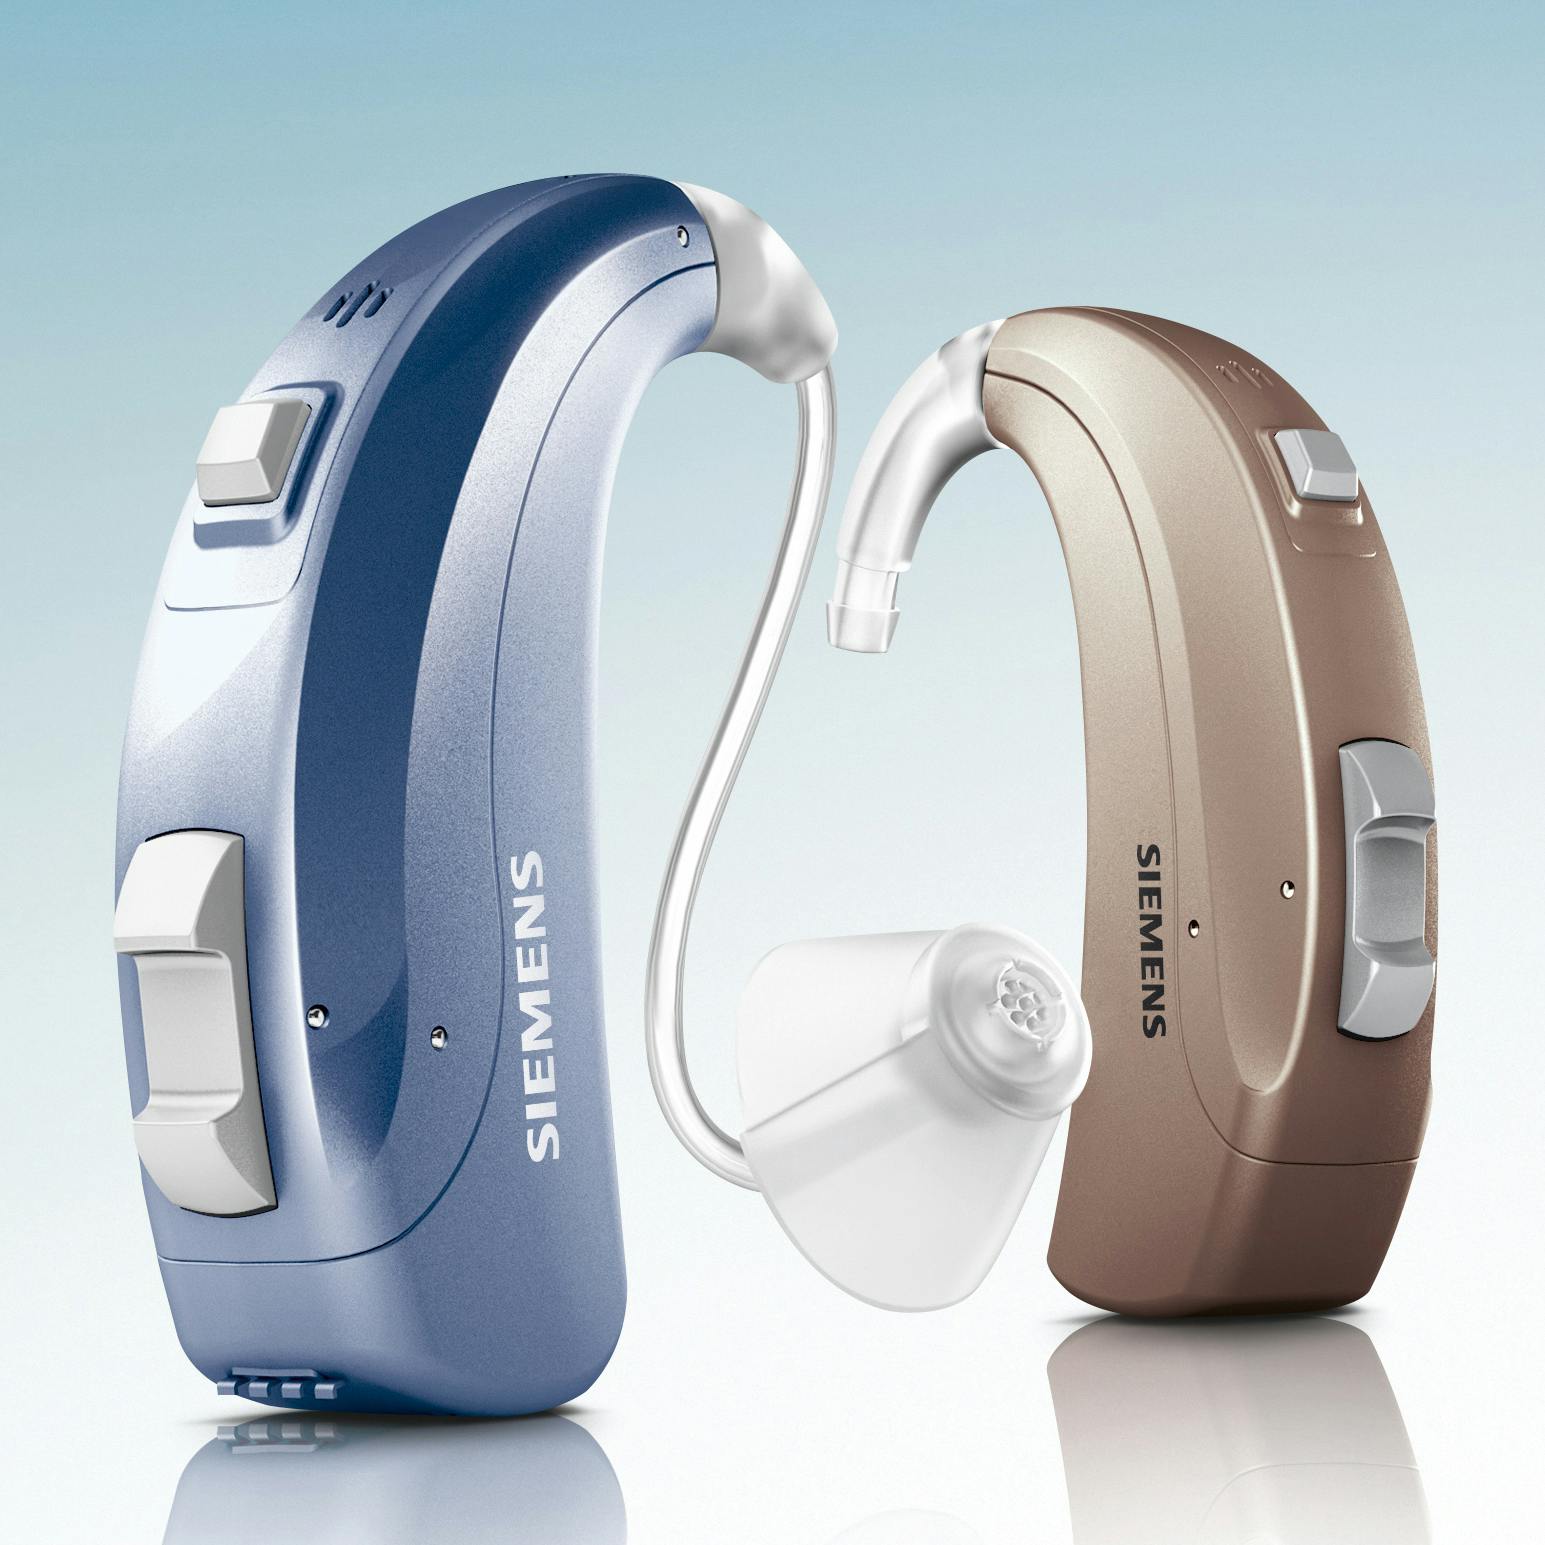 Siemens Hearing Aids Review 2022 Good Value or Bad Choice?